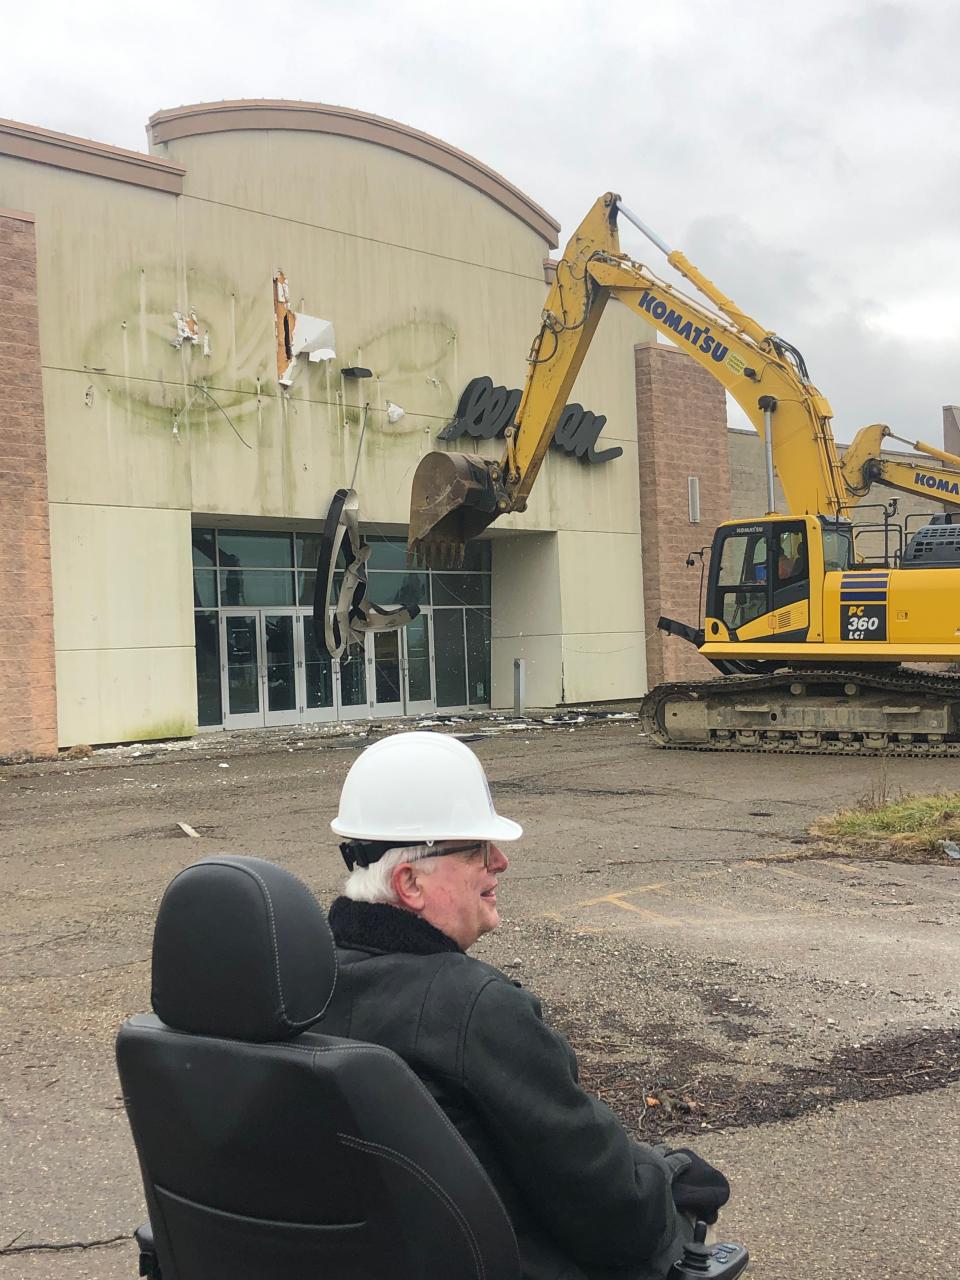 Alliance Mayor Alan Andreani and others watched Monday as excavators tore down a portion of the old Carnation City Mall. A new retail plaza with a Meijer superstore and other retailers will replace the mall.